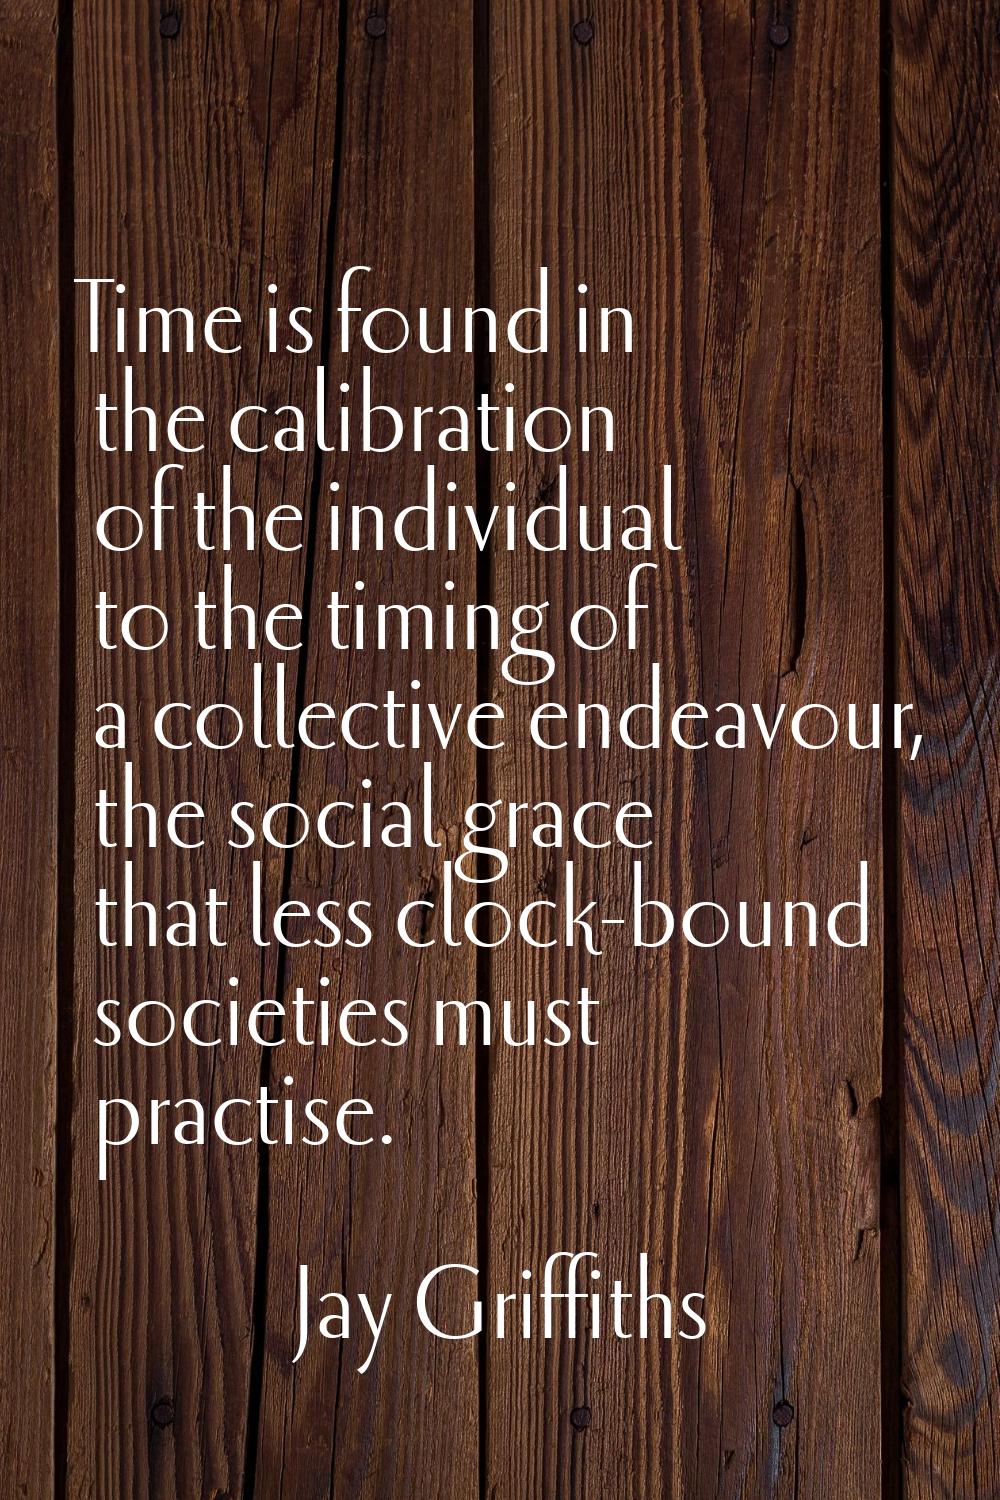 Time is found in the calibration of the individual to the timing of a collective endeavour, the soc